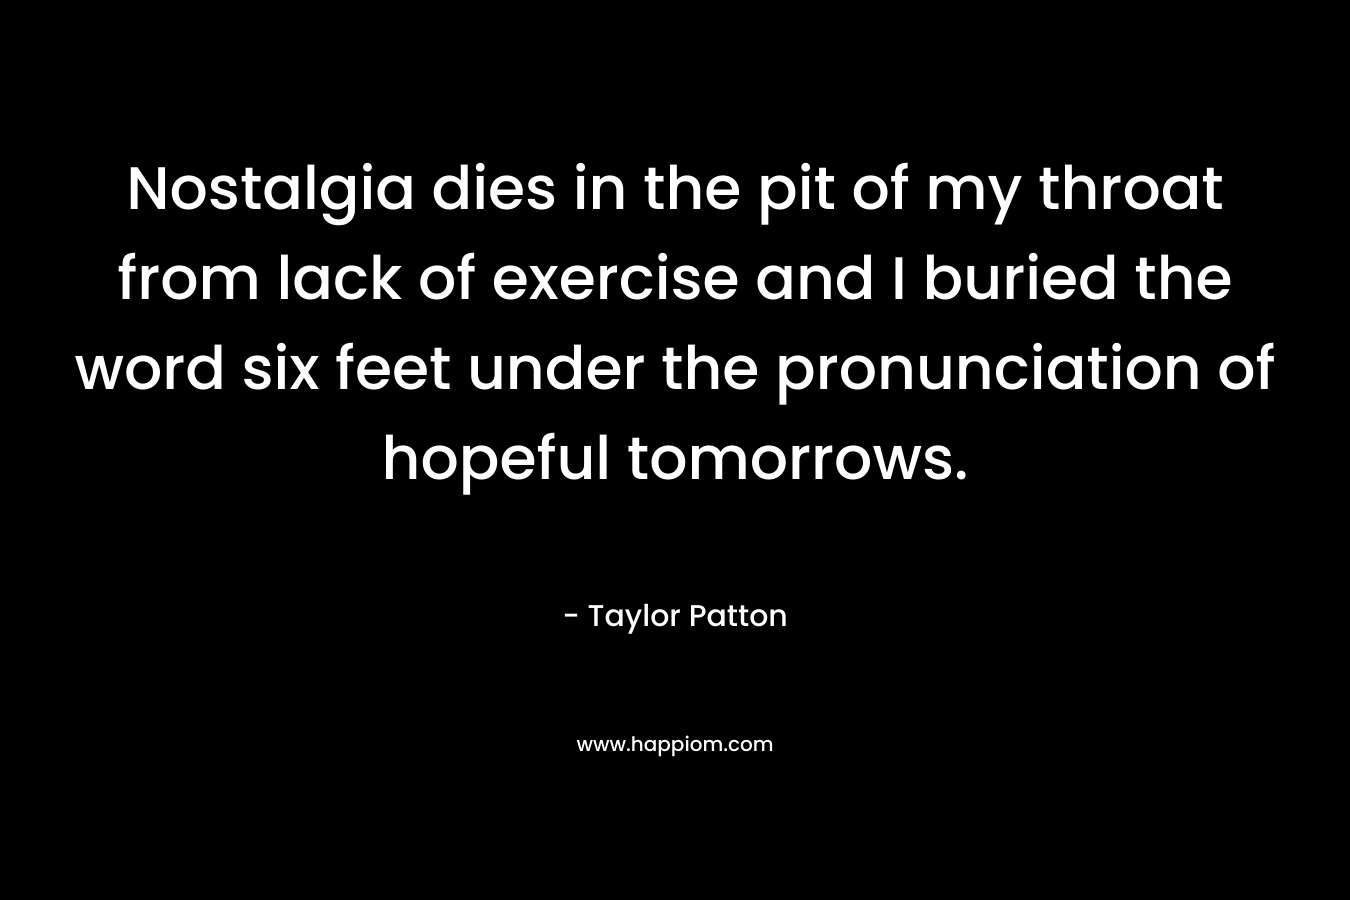 Nostalgia dies in the pit of my throat from lack of exercise and I buried the word six feet under the pronunciation of hopeful tomorrows.